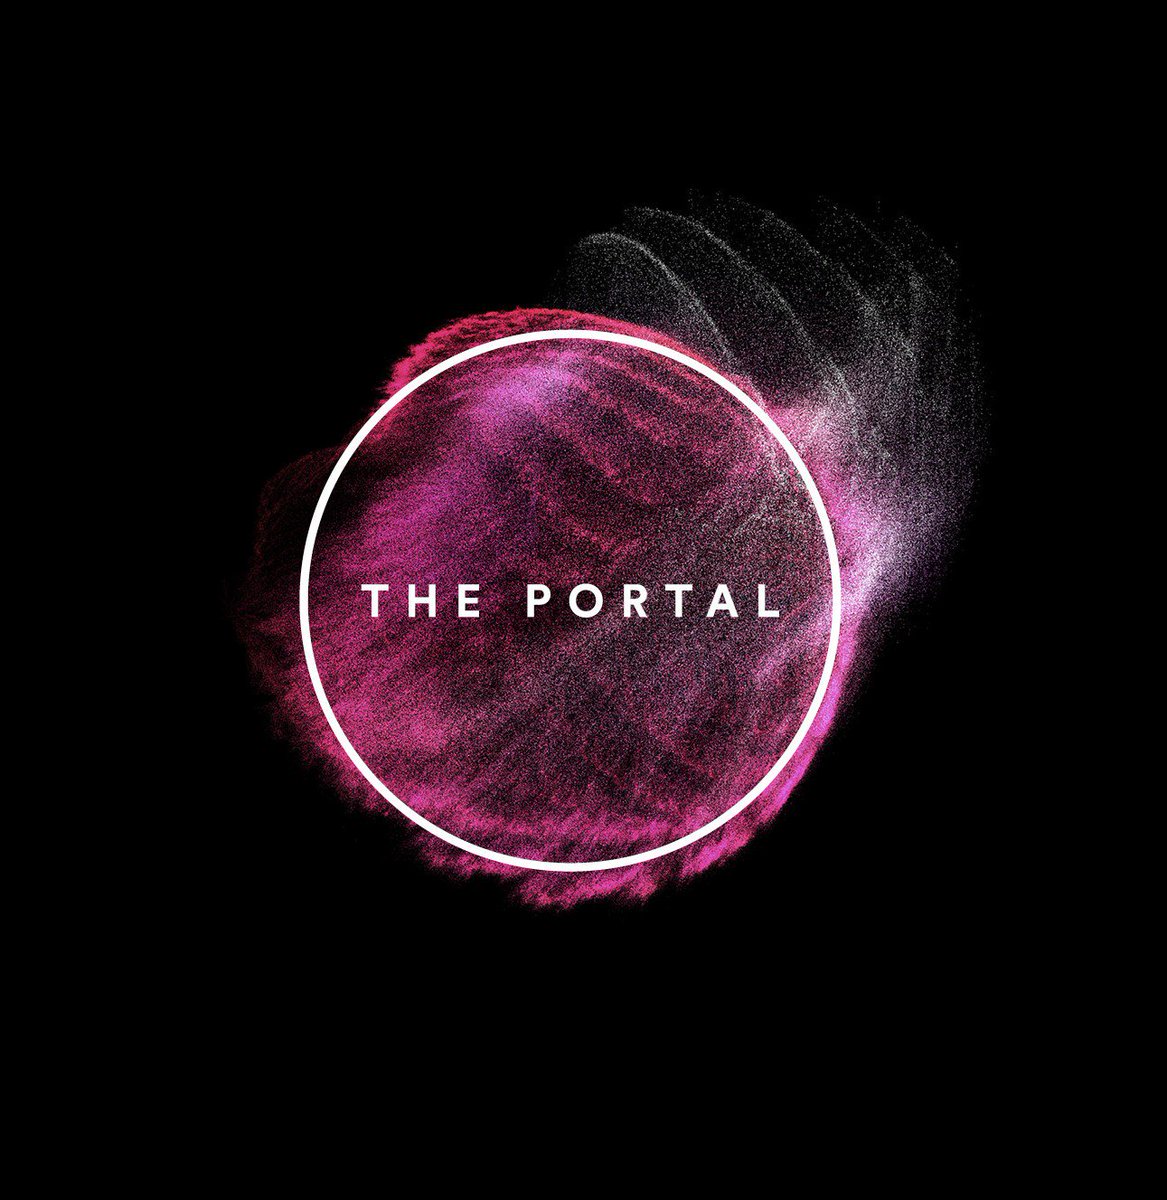 We are excited to finally see the beautiful directorial debut from Jacqui Fifer. Mindfulness in motion! More pics in coming weeks #theportal #jacquififer #tomcronin The Portal Movie 
entertheportal.com/watchthefilm